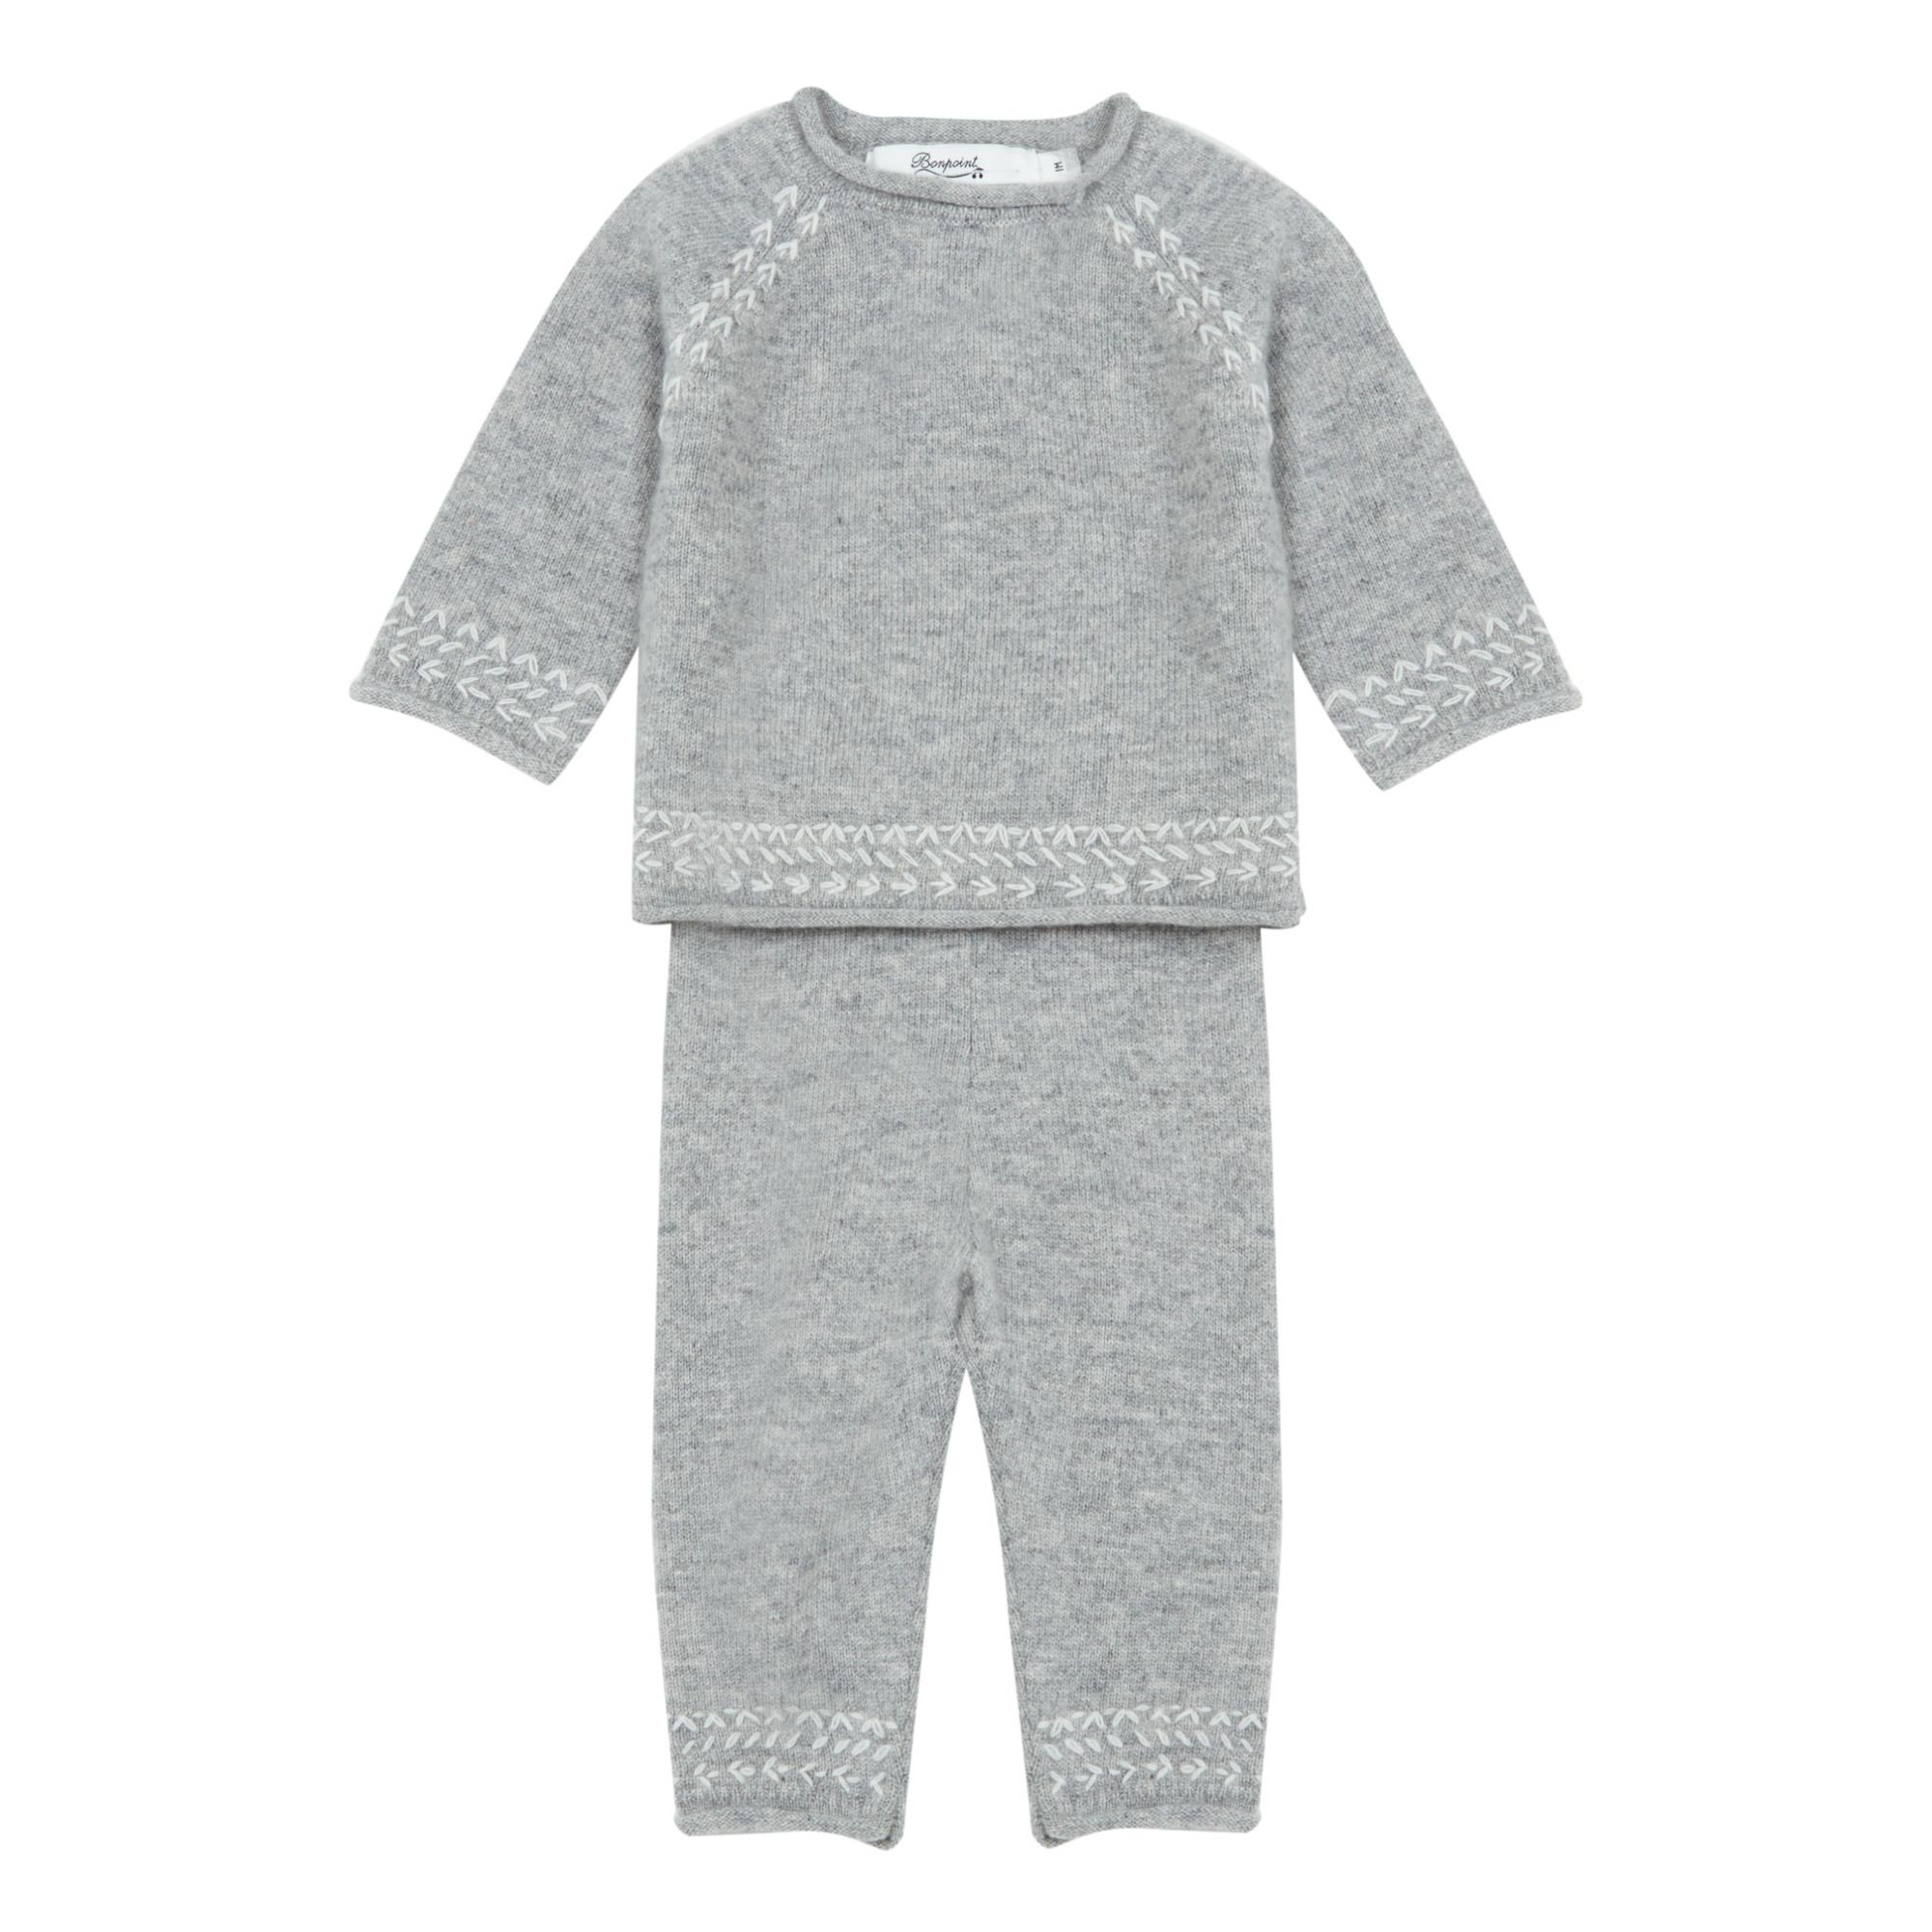 Bonpoint - Pull + Legging Cachemire Thelo - Fille - Gris chiné